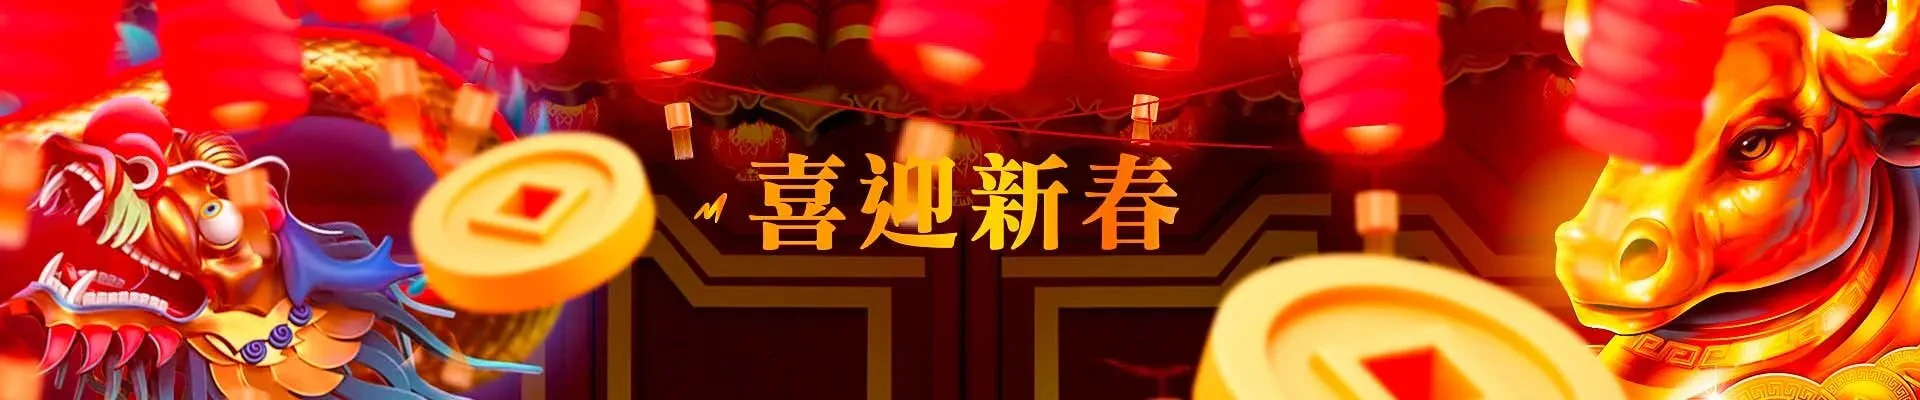 header meilleures slots nouvel an chinois